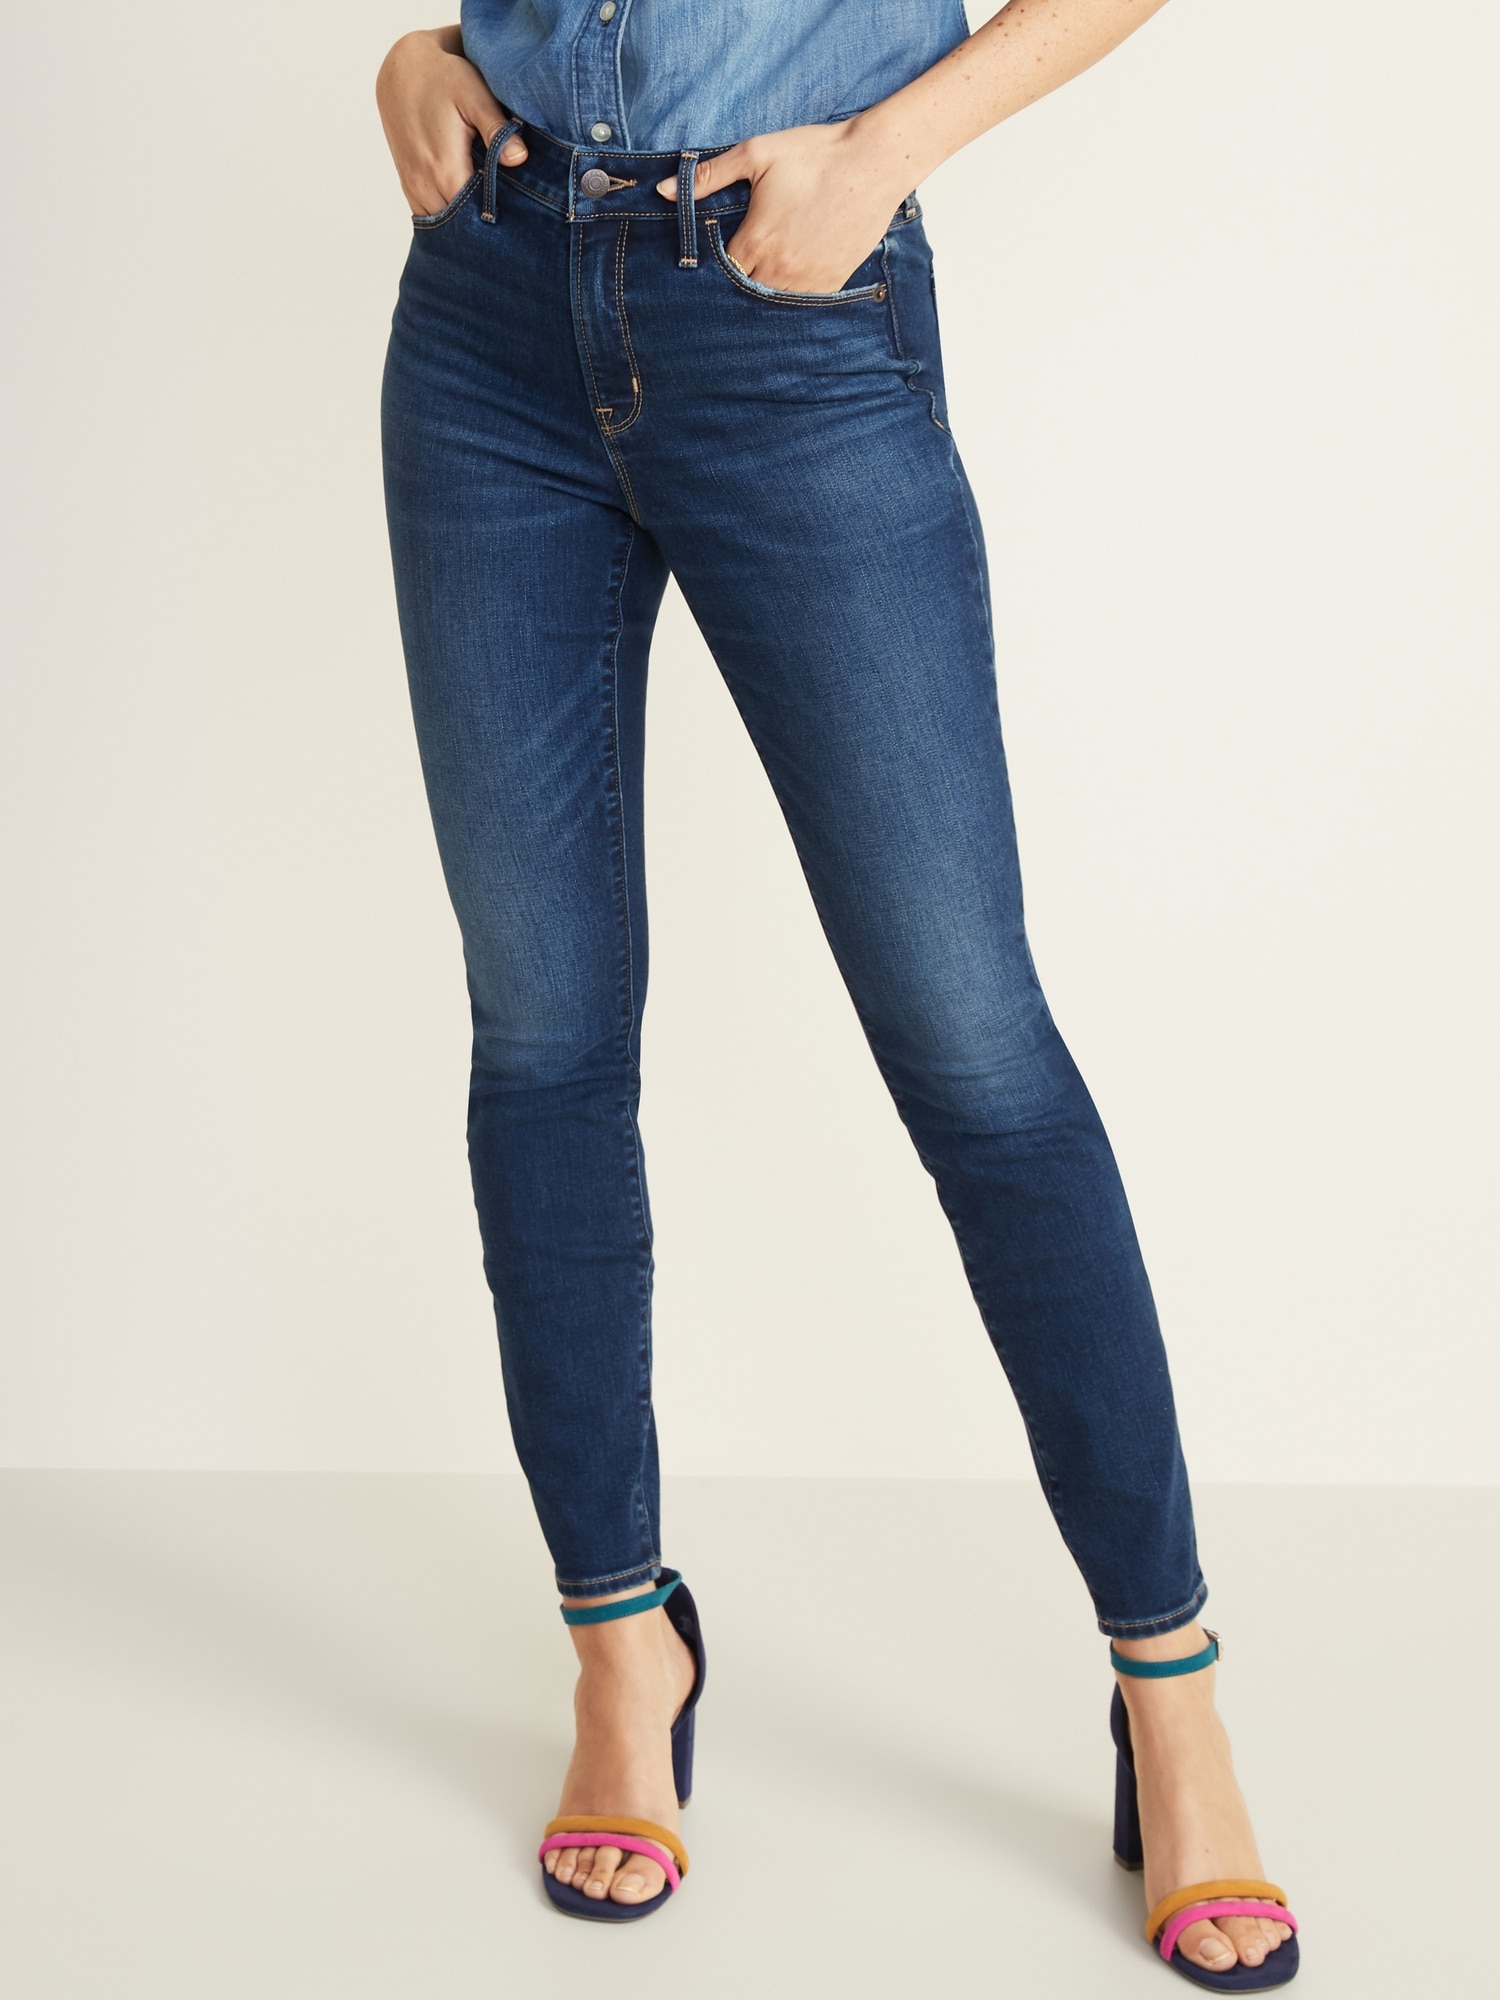 old navy womens high waisted jeans